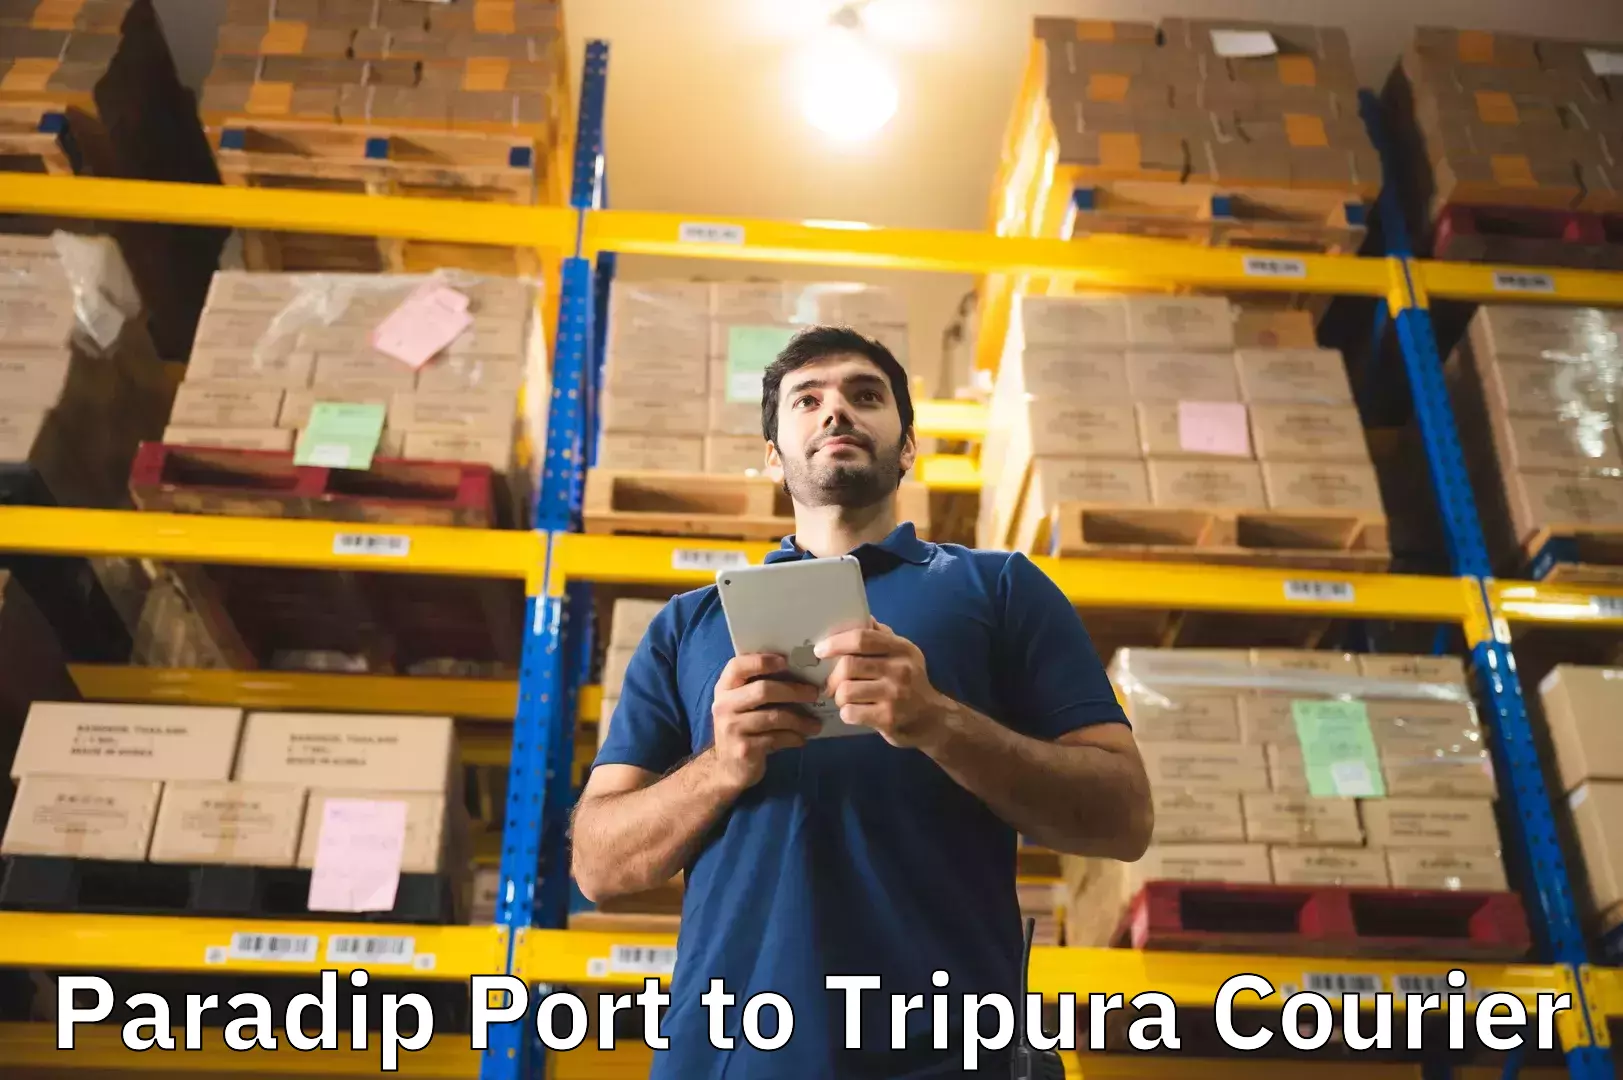 Budget-friendly baggage courier Paradip Port to Udaipur Tripura